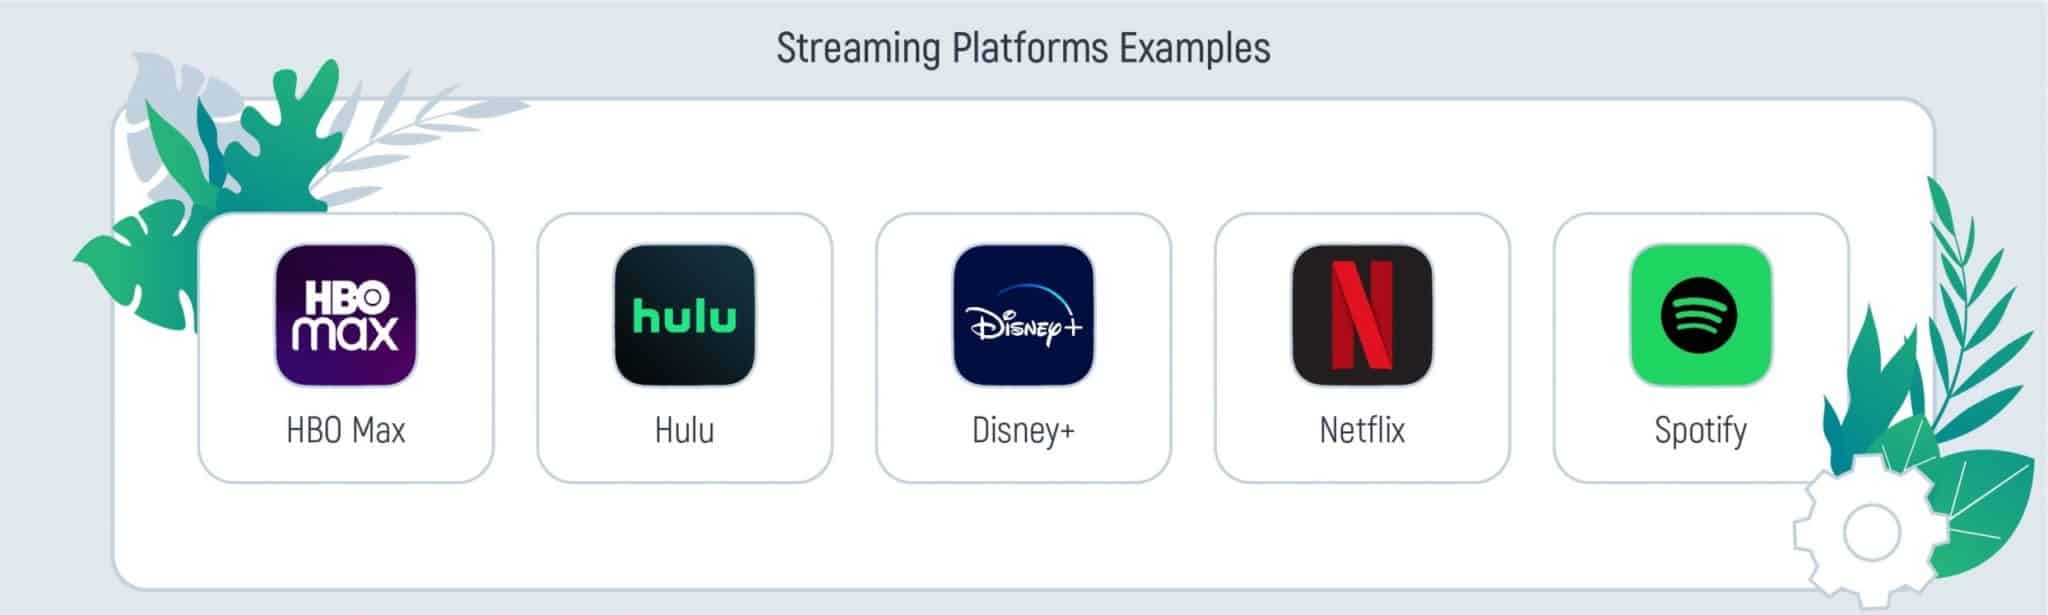 Essential Features for Streaming Platforms